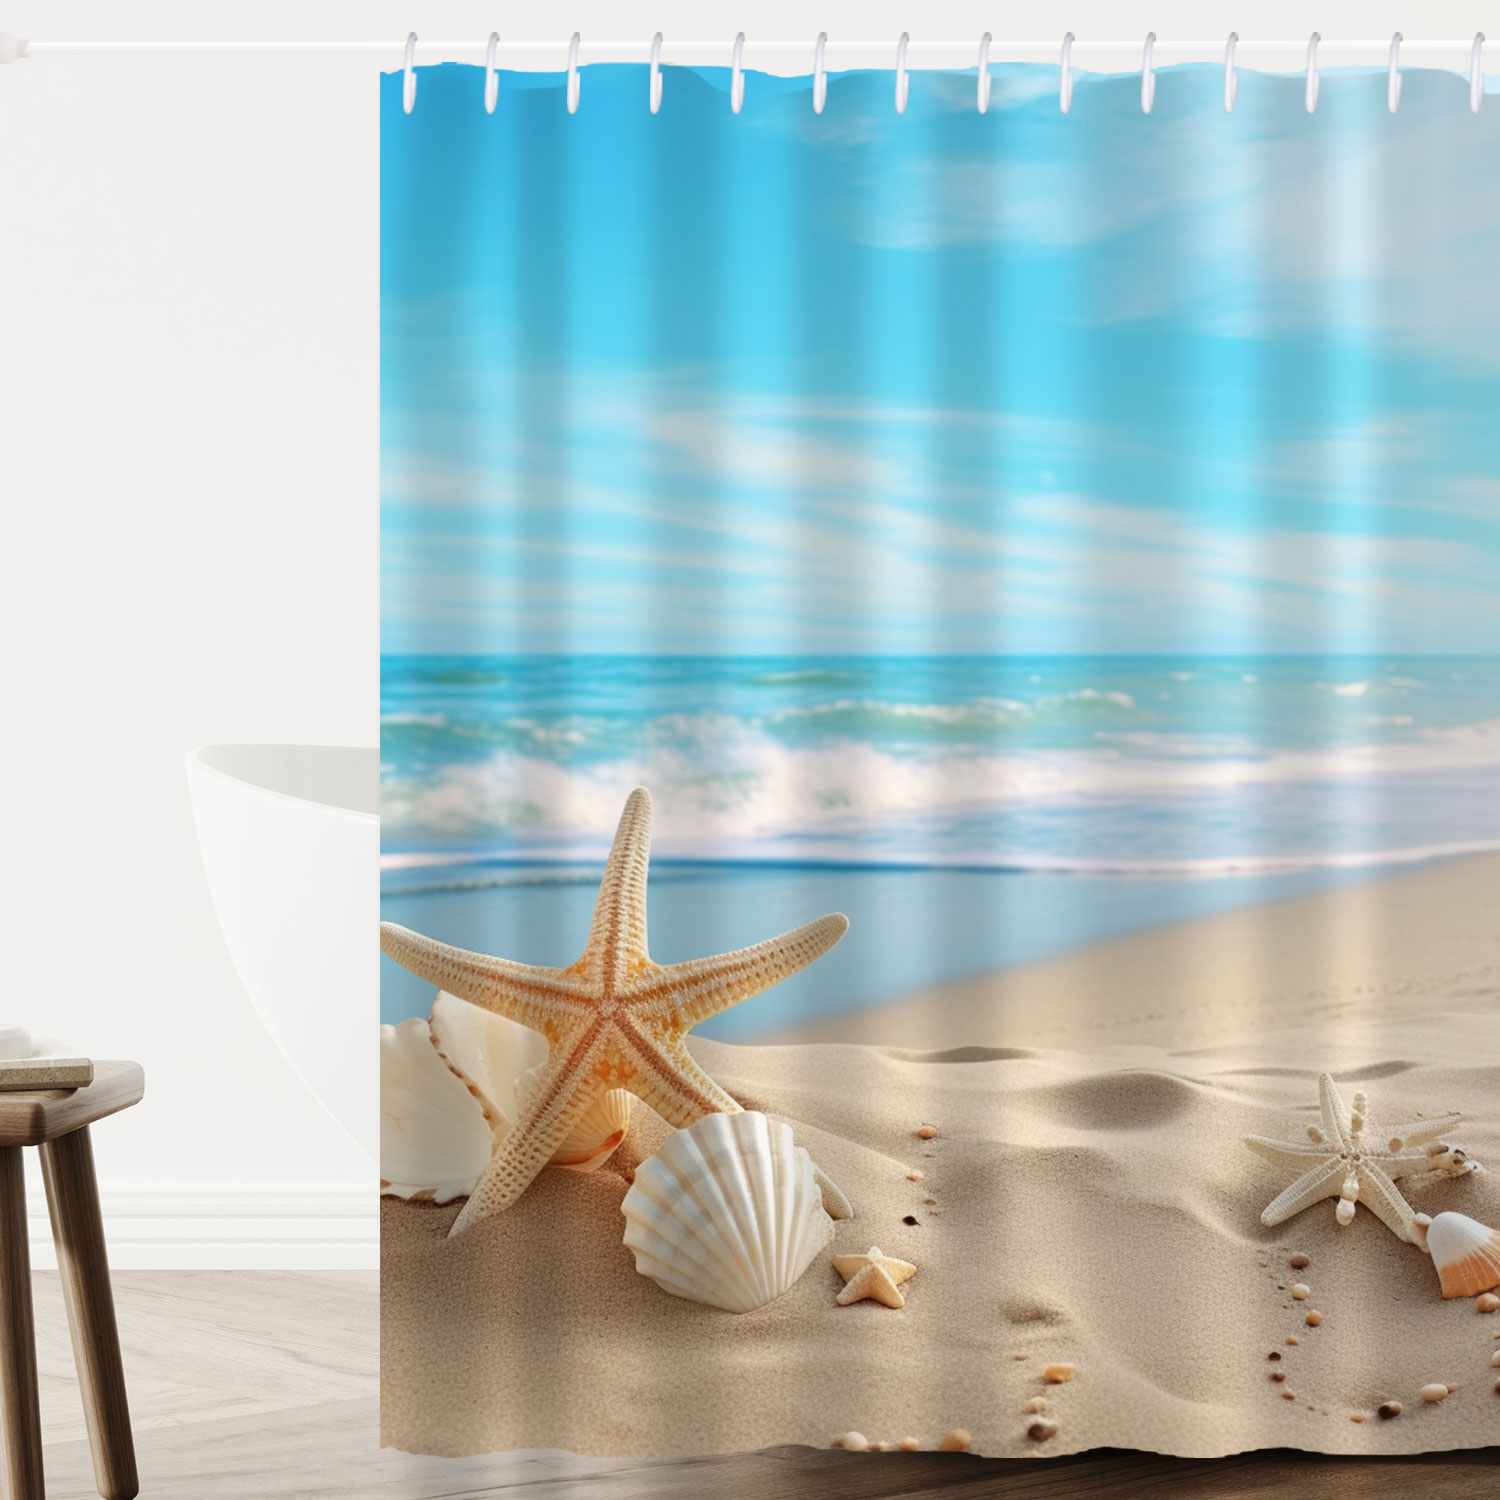 Transform your bathroom into a coastal oasis with the Cotton Cat Ocean Beach Starfish Seashell Shower Curtain. Featuring a beautiful collection of starfish and shells, this shower curtain is the perfect addition to your.